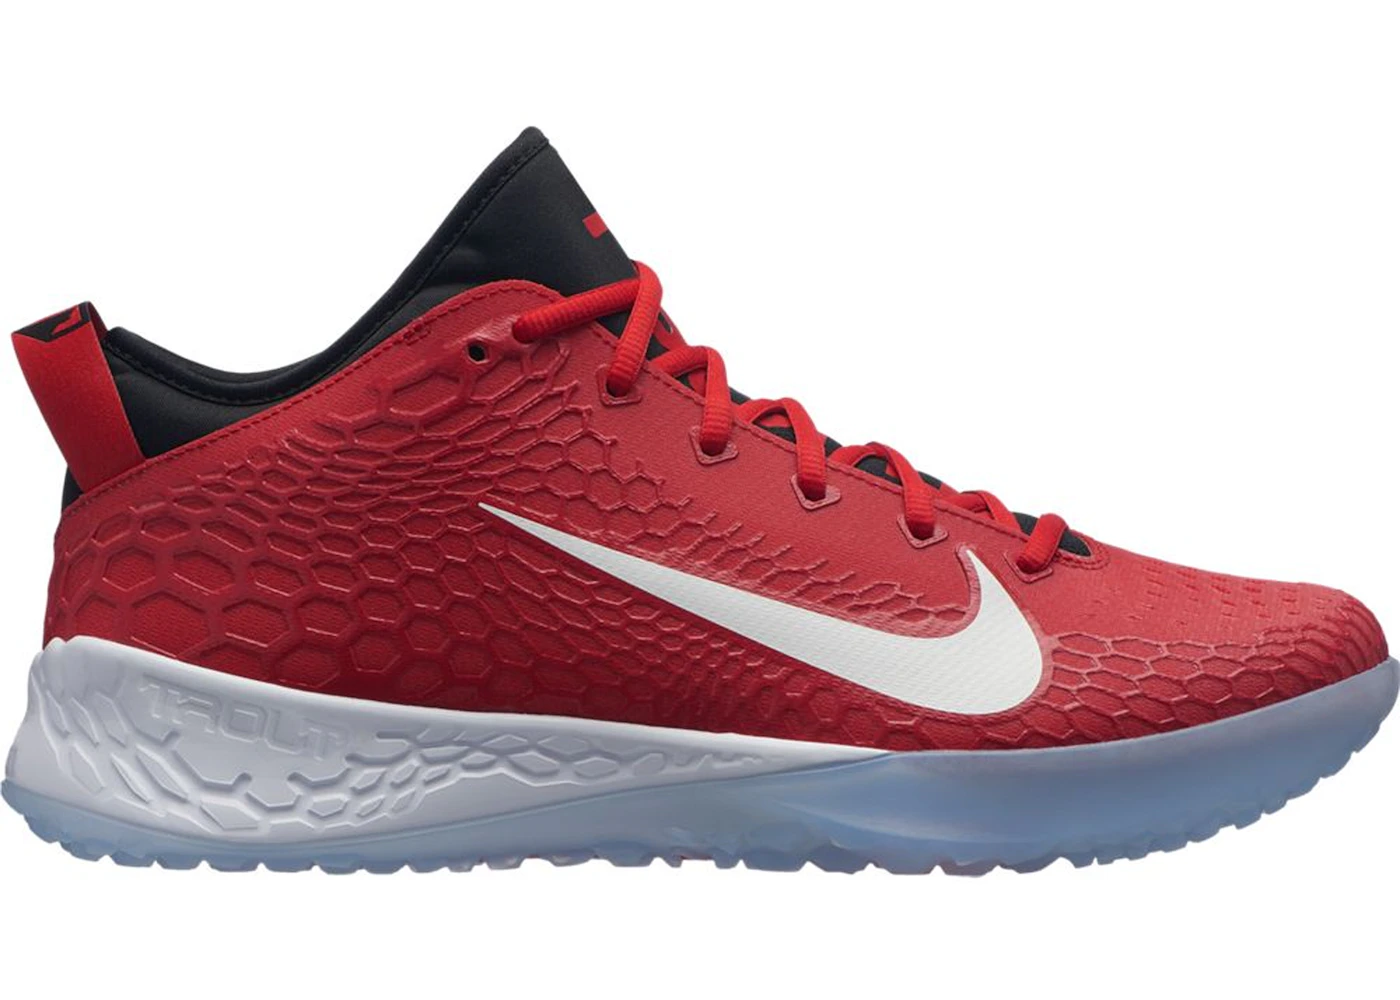 mike trout turf shoes 7